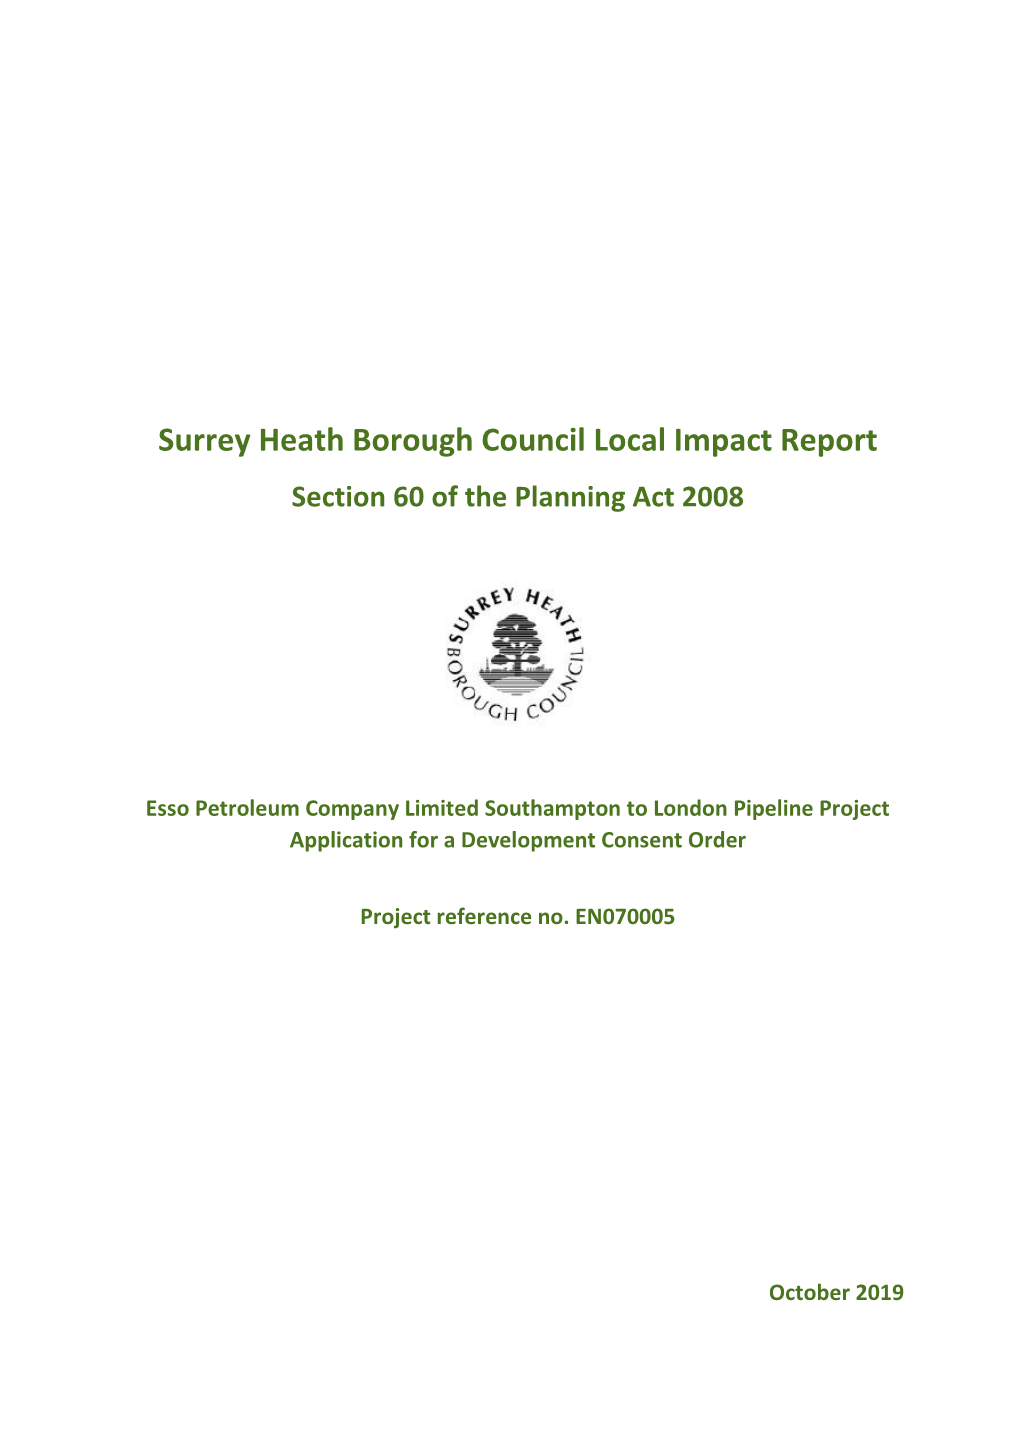 Surrey Heath Borough Council Local Impact Report Section 60 of the Planning Act 2008